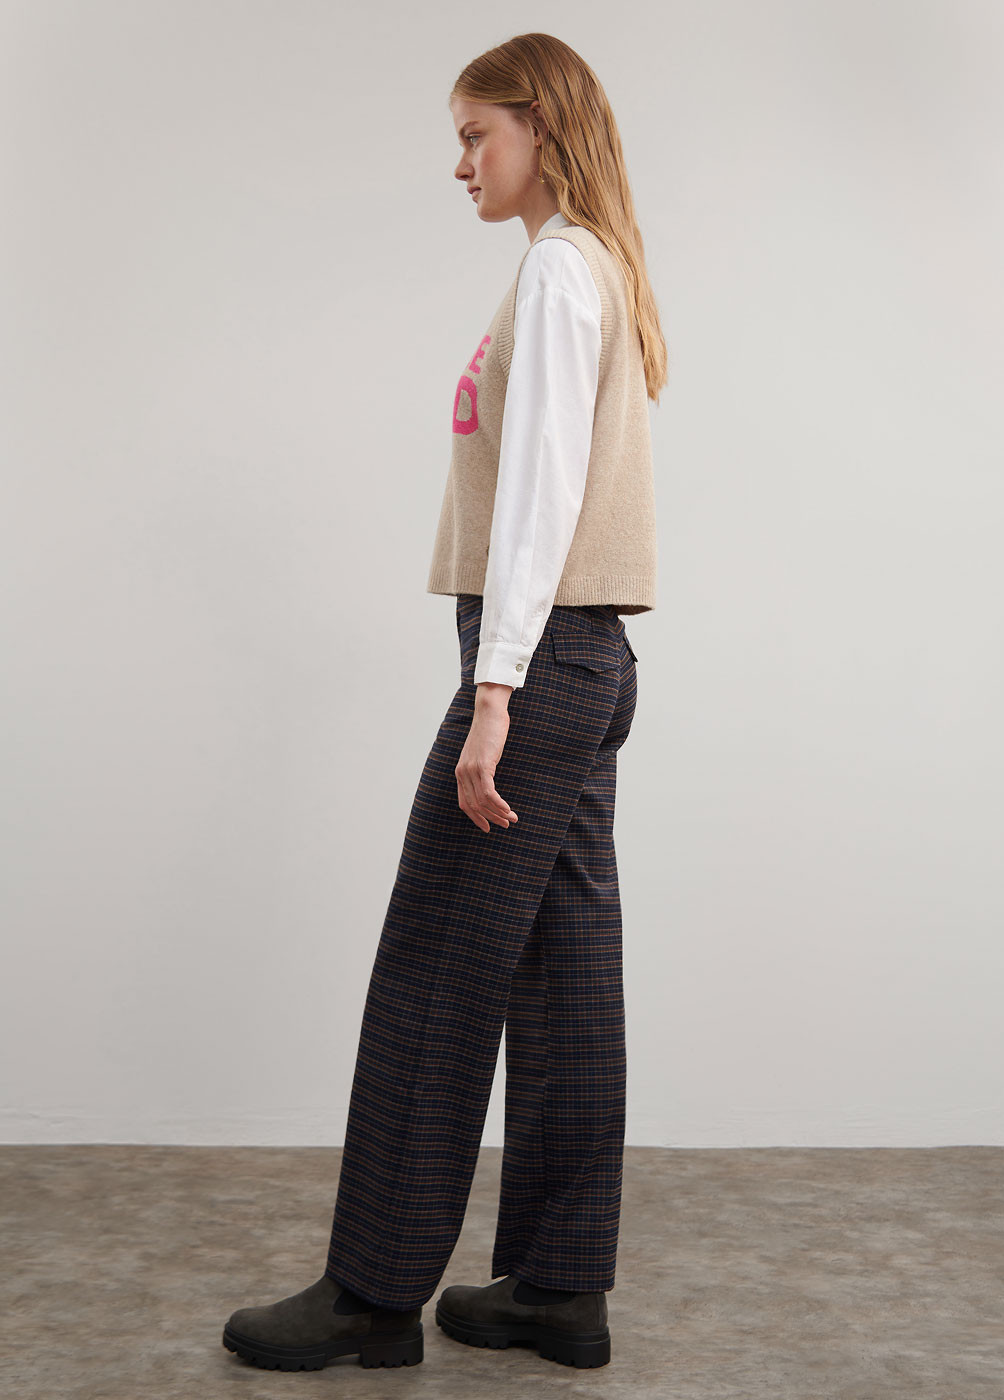 CHECK-PRINT STRAIGHT-CUT TROUSERS